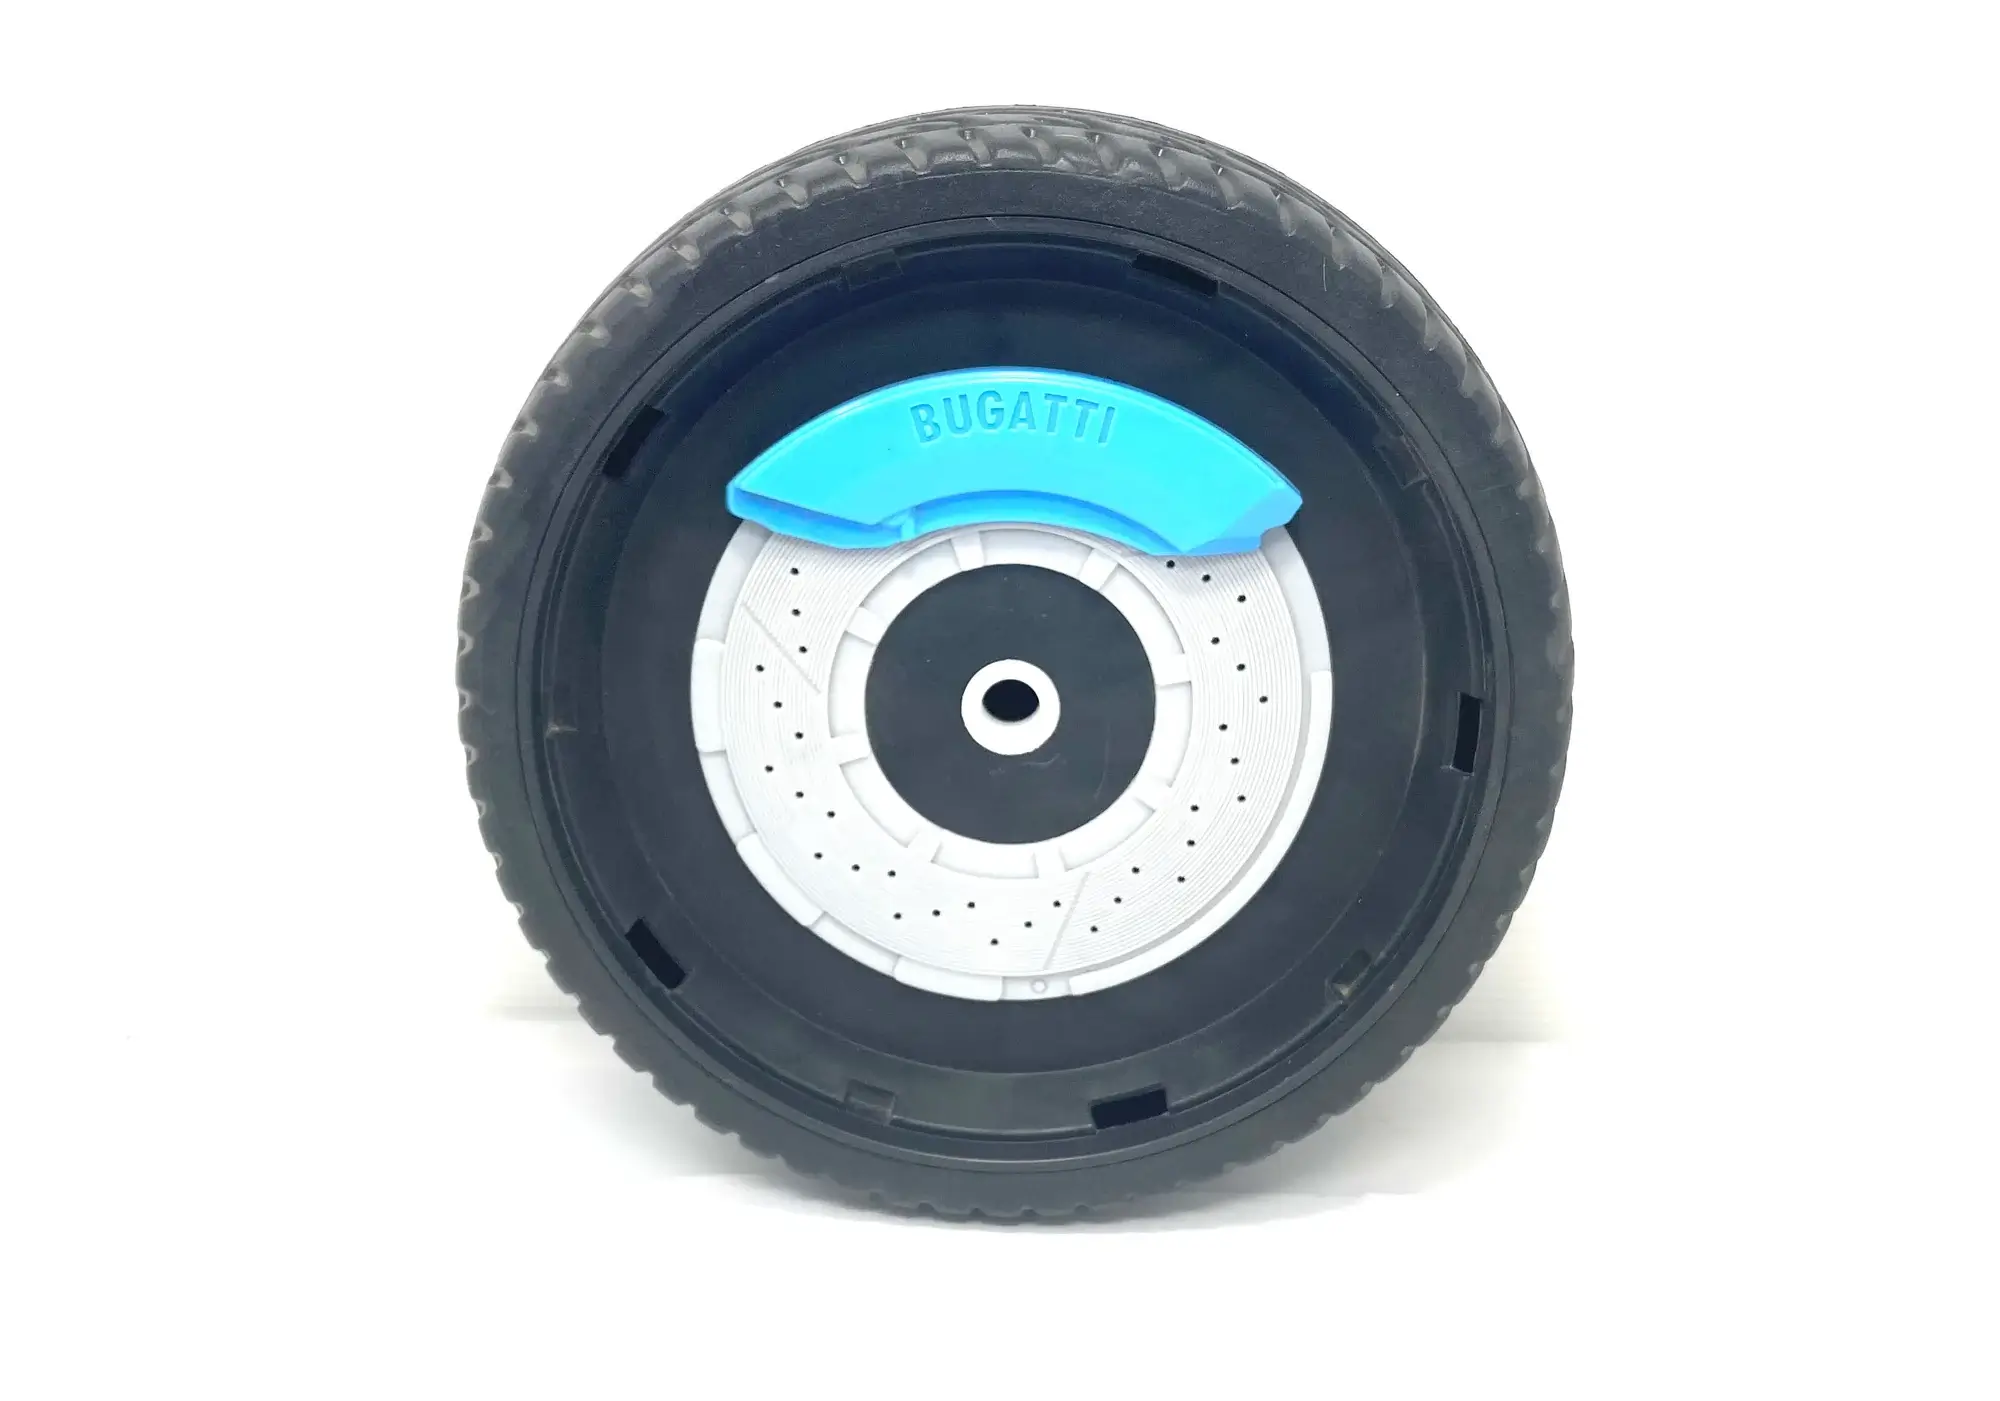 “Enhance Performance with 12v Bugatti Divo Rear Wheel – Upgrade Your Ride Today!”